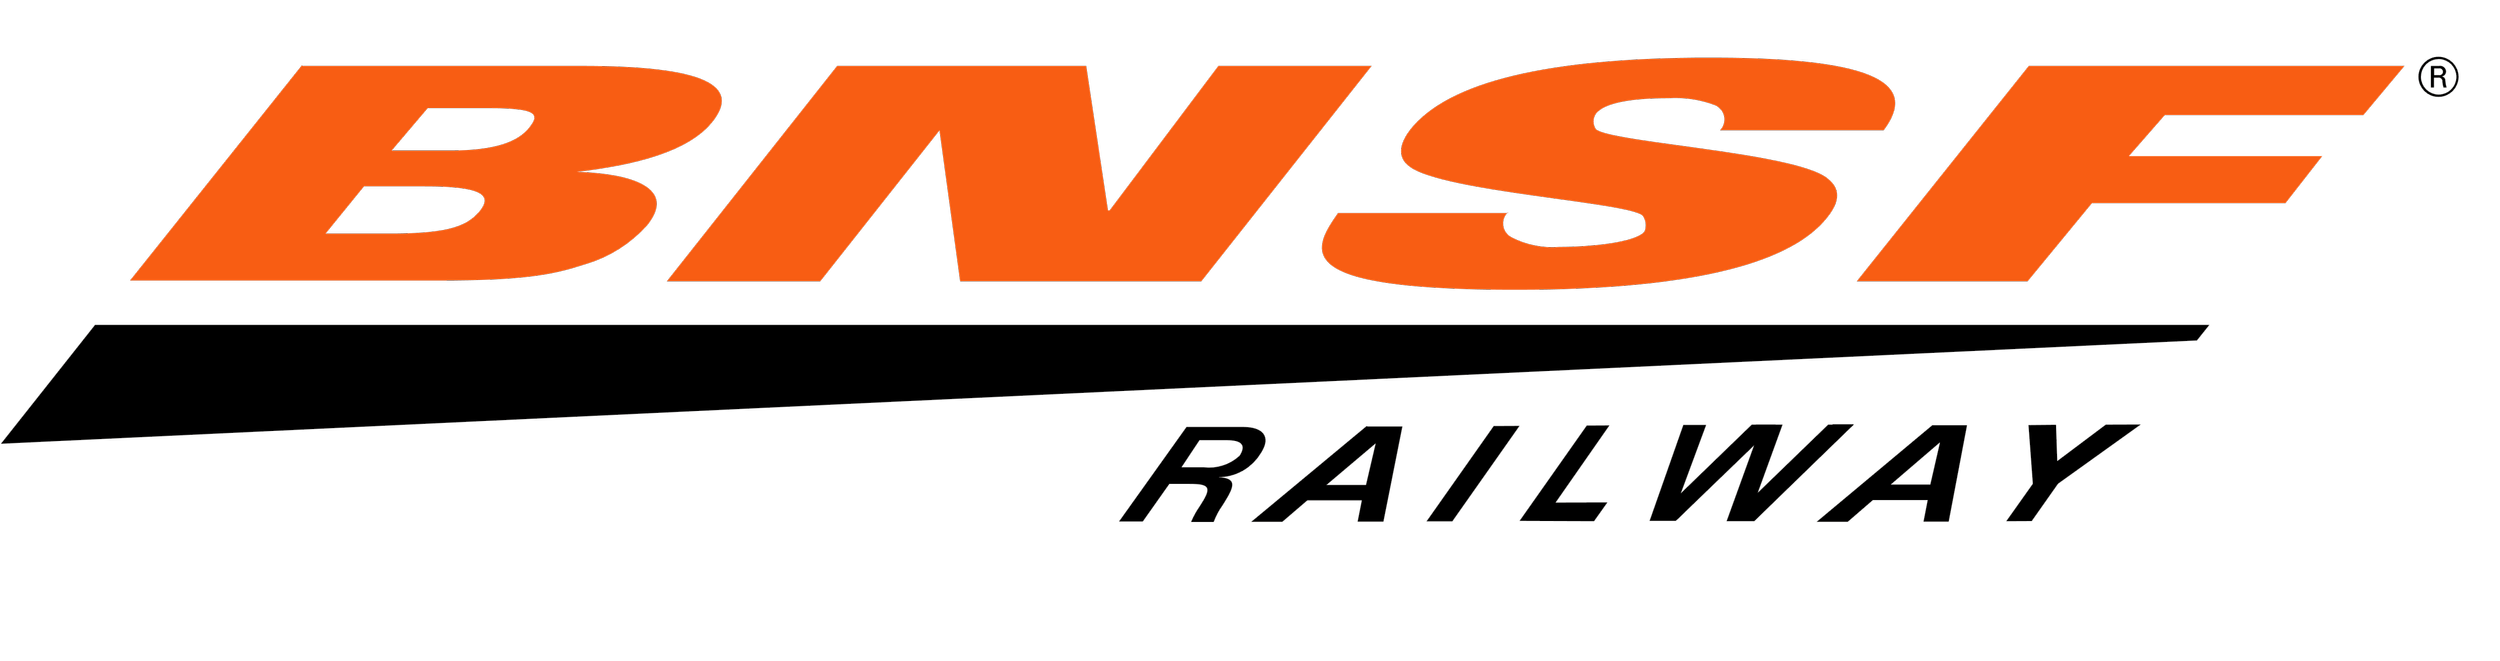 BNSF-Logo-for-MYI.png